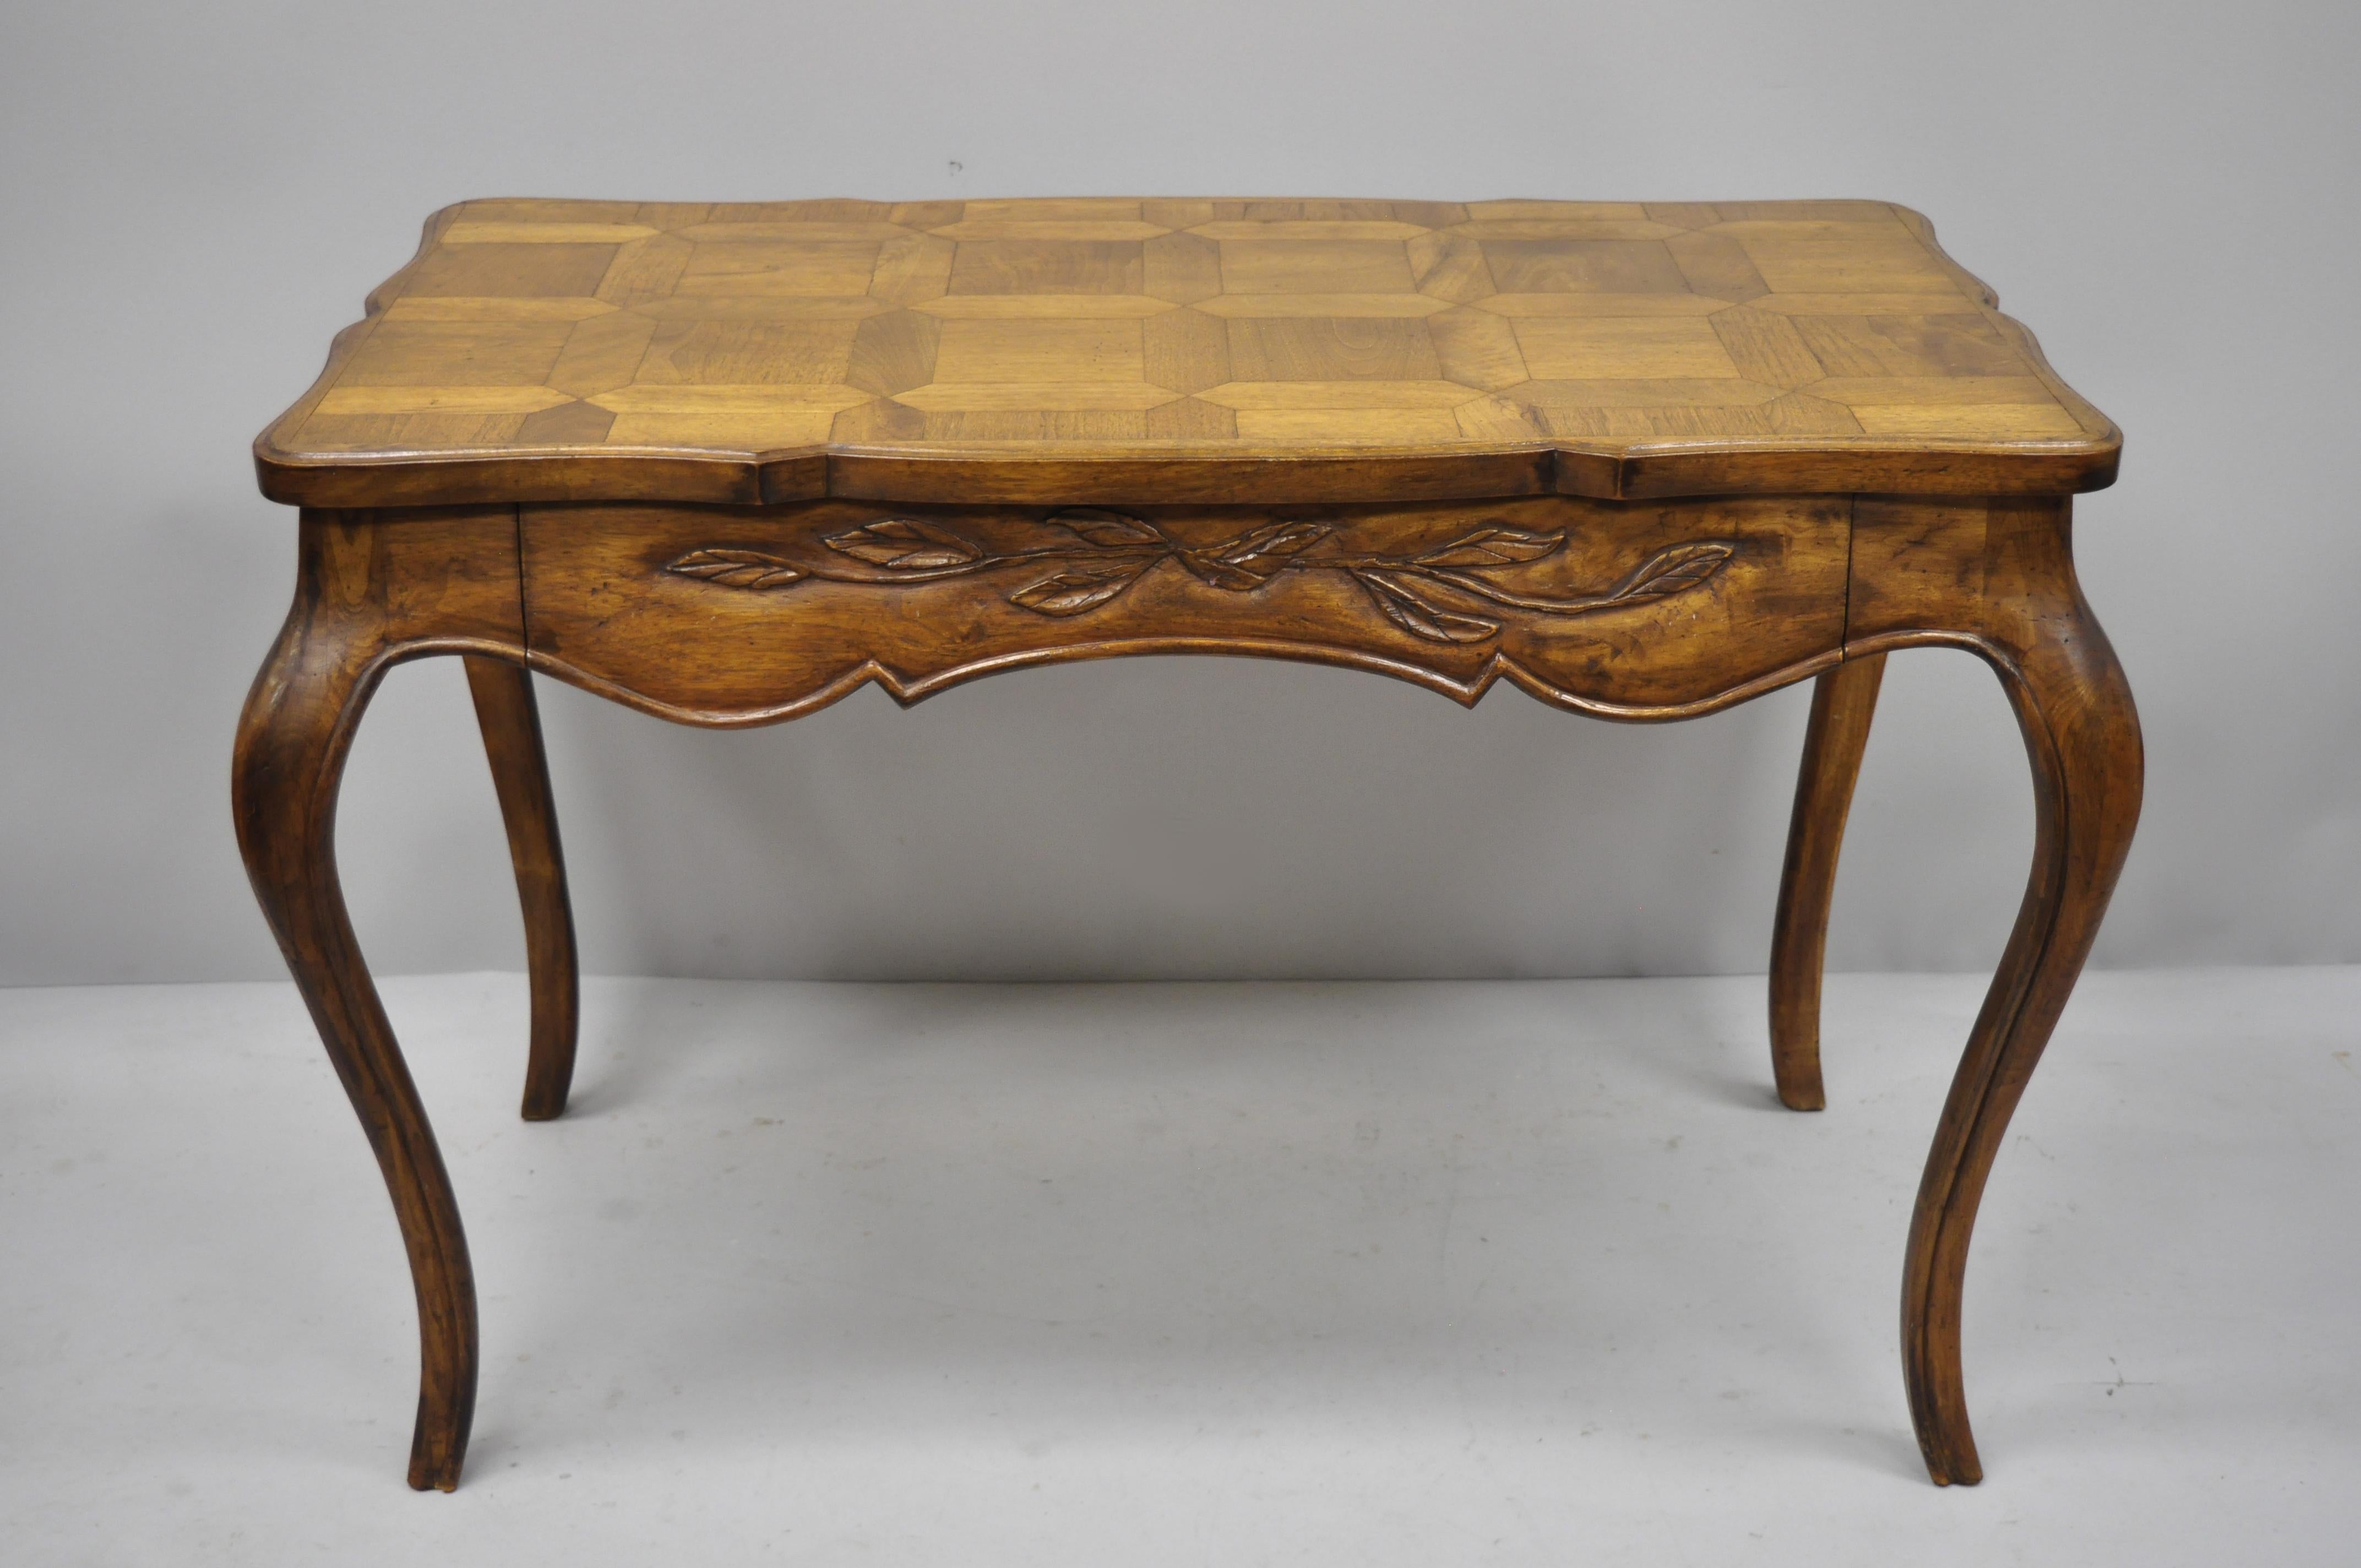 Vintage French Country Provincial one drawer writing desk with parquetry inlaid top. Item features parquetry inlaid top, beautiful wood grain, 1 drawer, cabriole legs, great style and form, circa mid-20th century. Measurements: 29